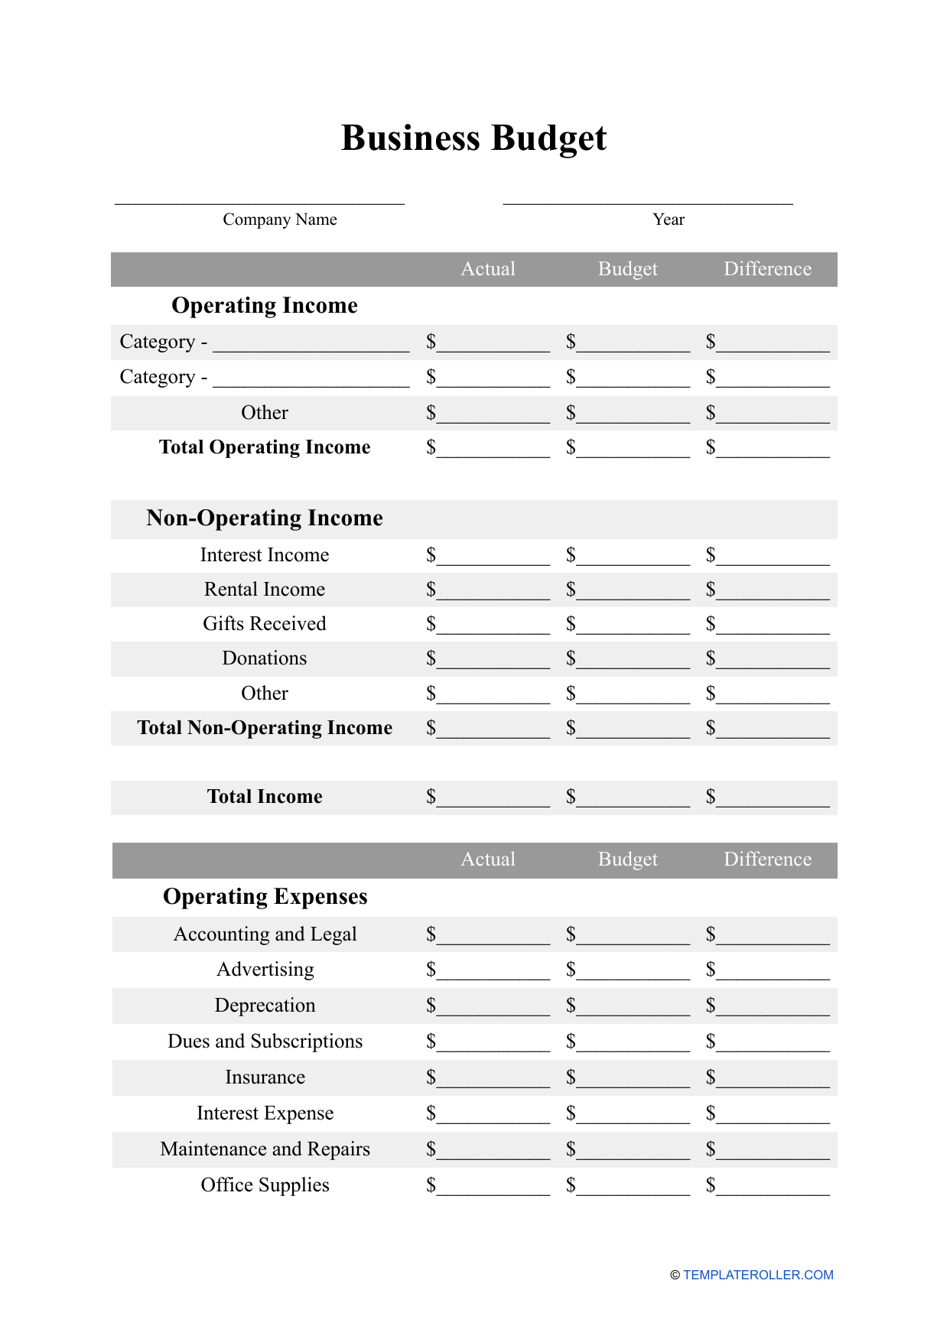 Business Budget Template, Page 1